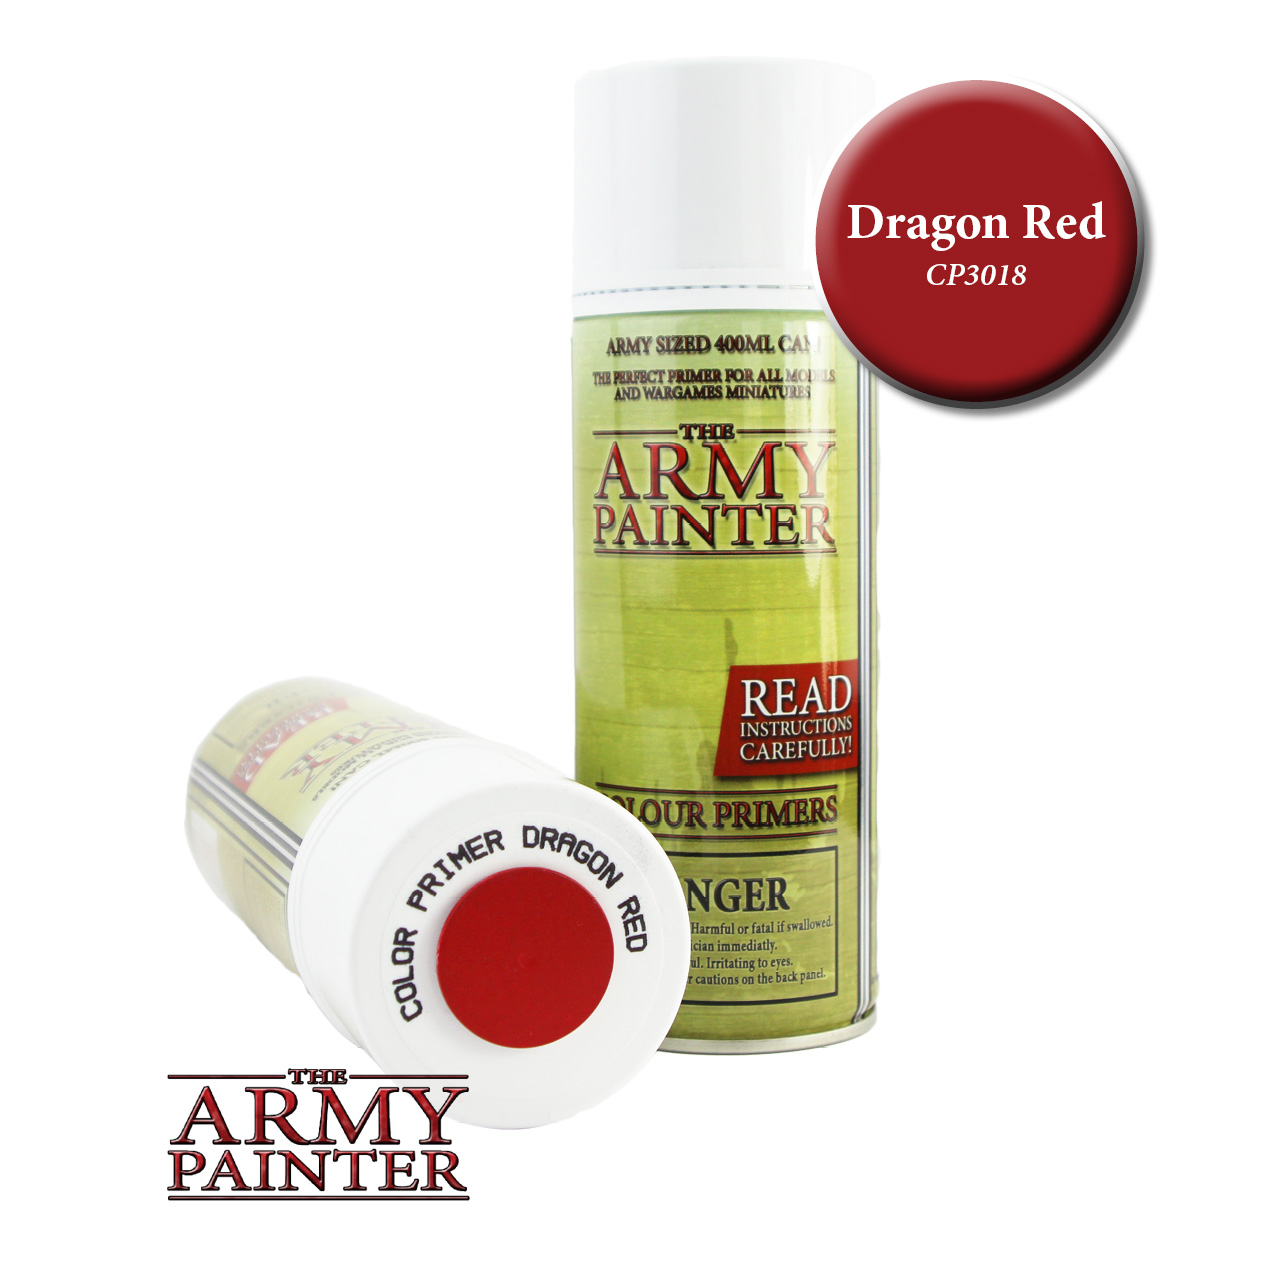 43018 CP3018S ARMY PAINTER SPRAY DRAGON RED